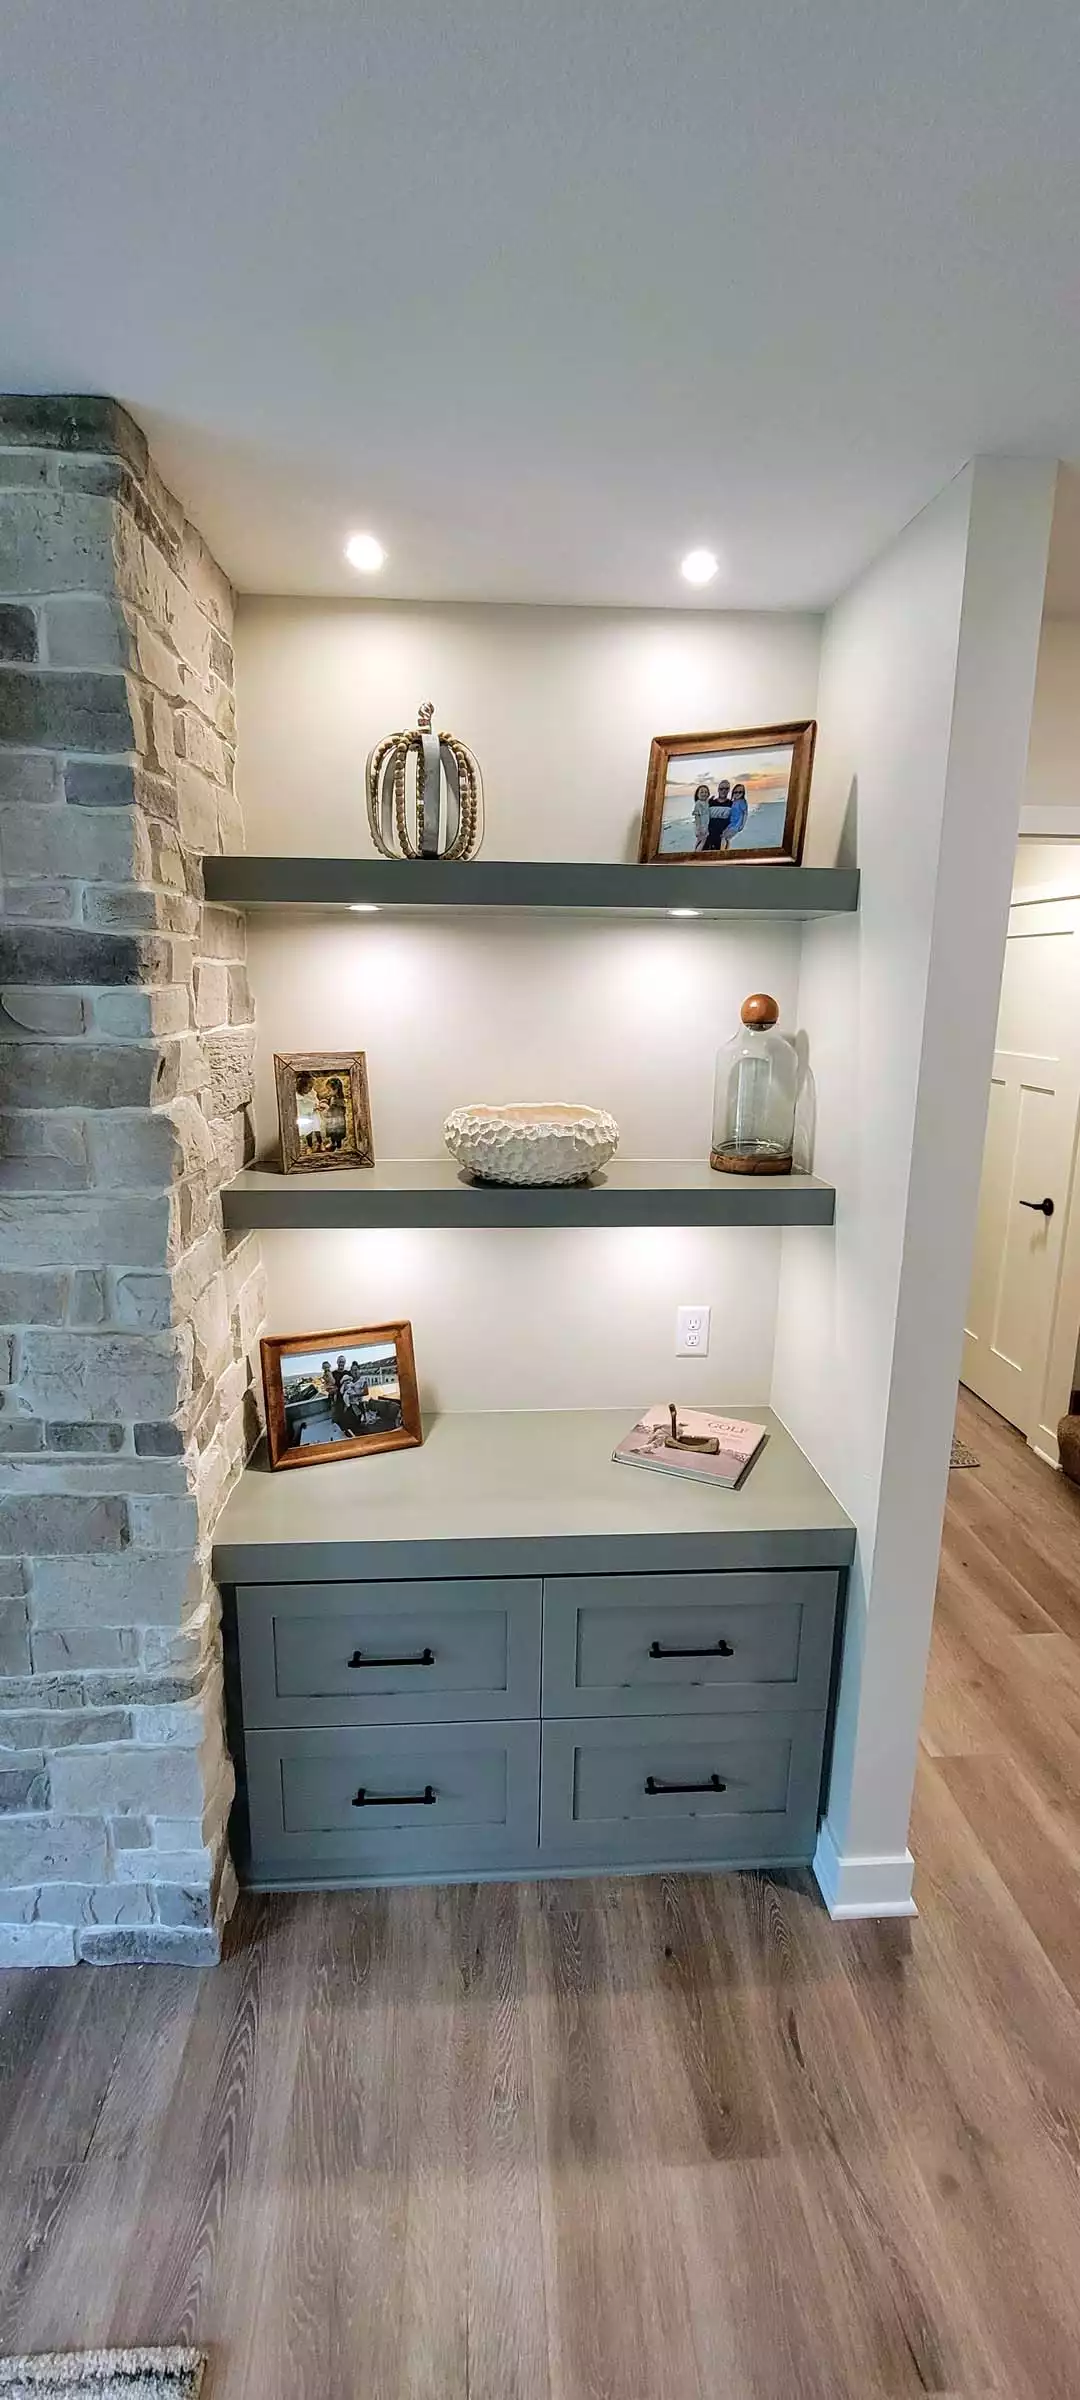 Floating shelves and cabinets flanking fireplace wall